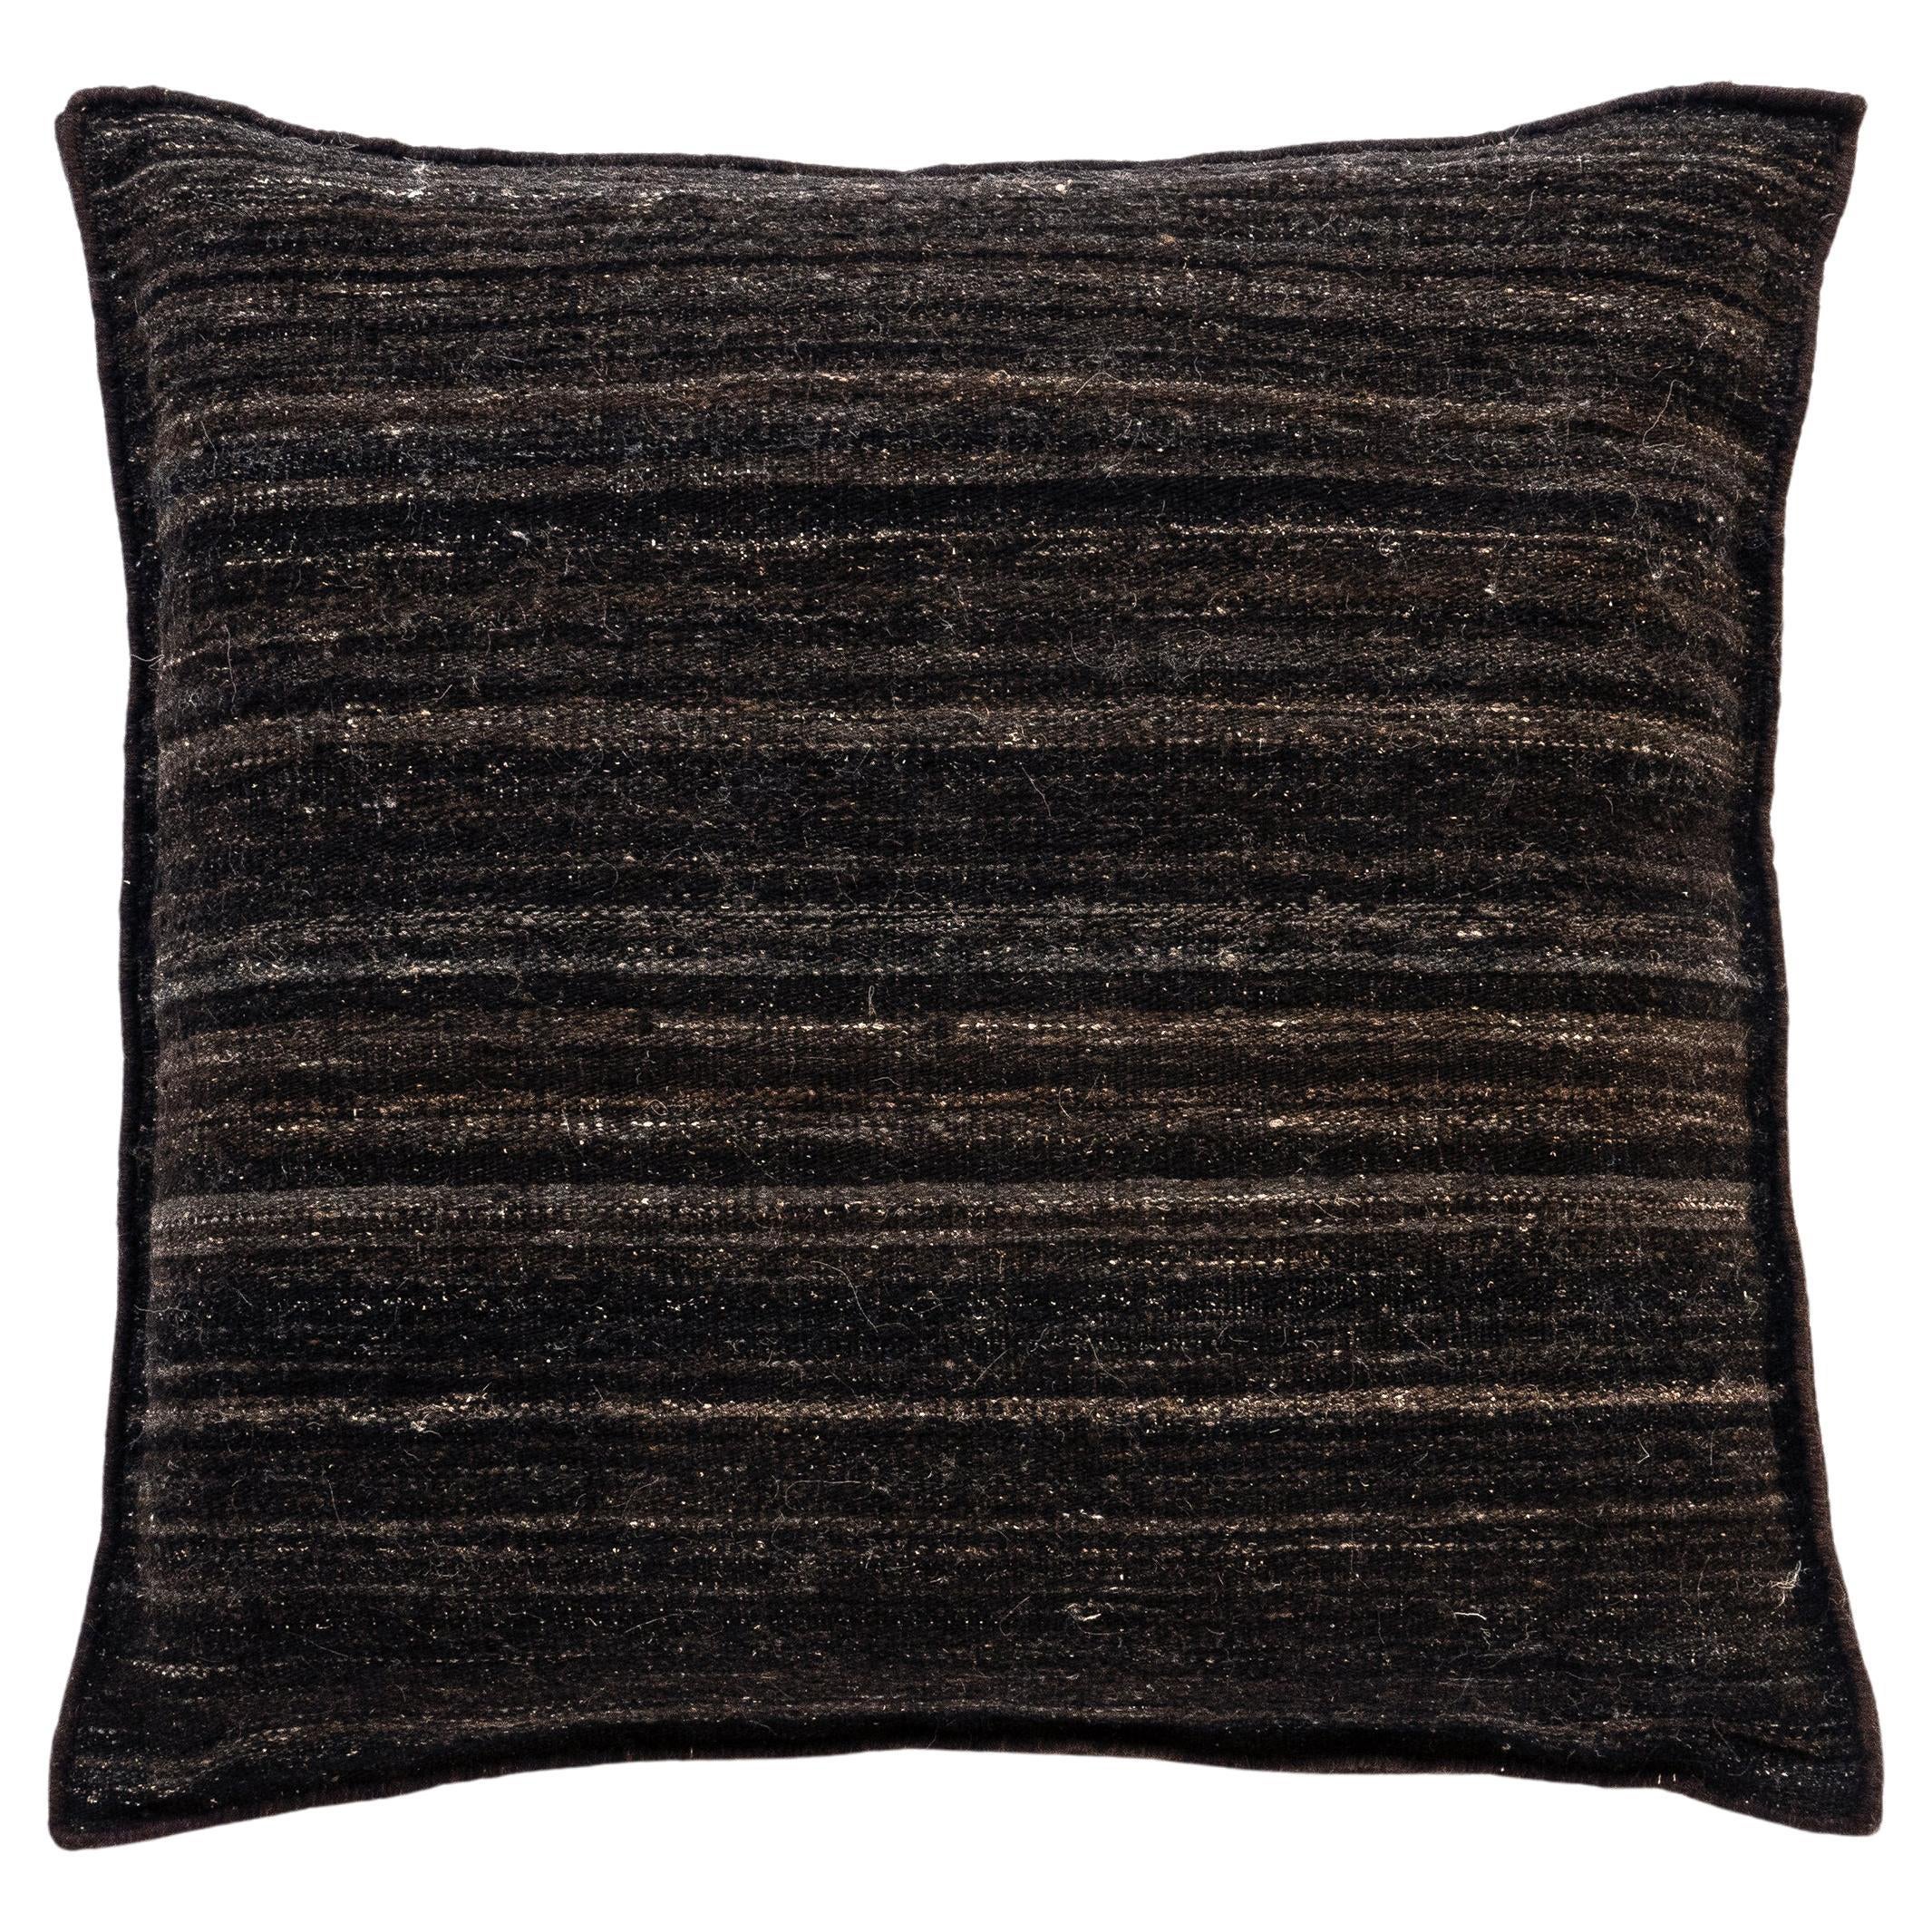 'Wellbeing' Heavy Kilim Cushion by Ilse Crawford for Nanimarquina For Sale